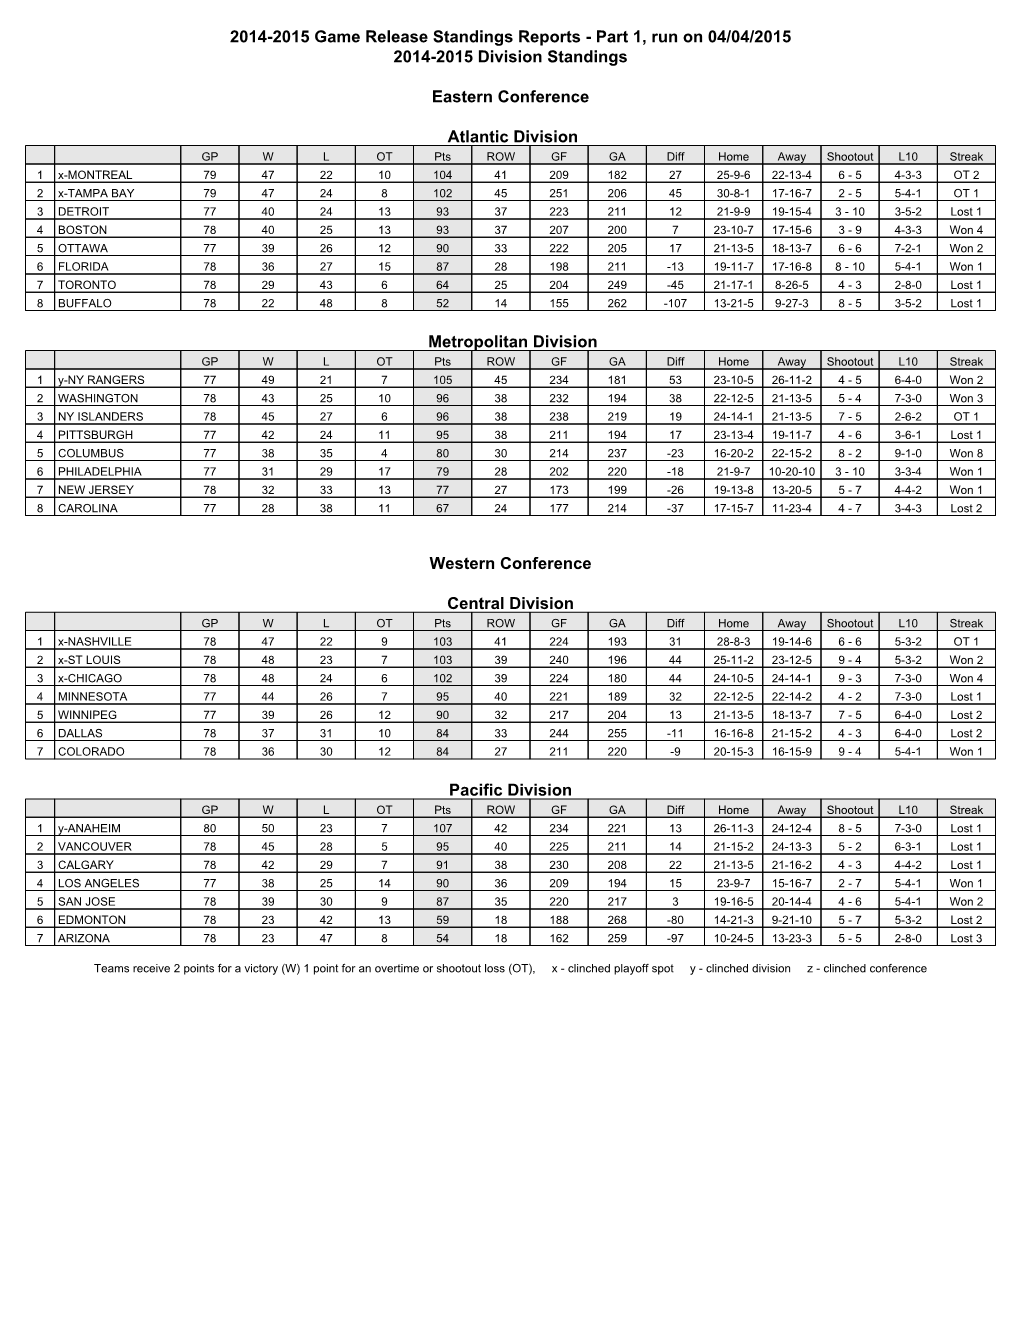 2014-2015 Game Release Standings Reports - Part 1, Run on 04/04/2015 2014-2015 Division Standings